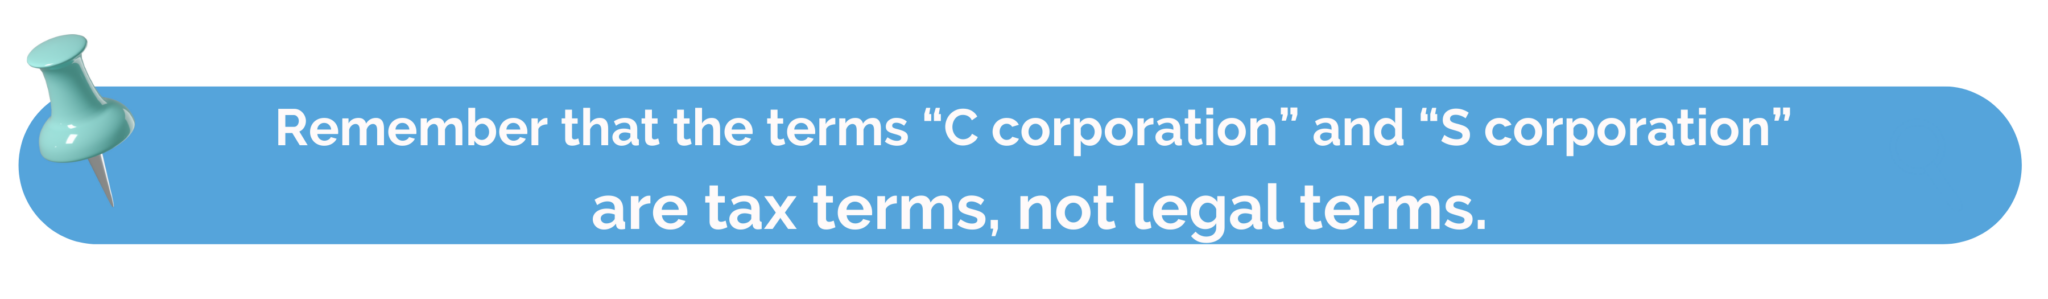 (Remember that the terms “C corporation” and “S corporation” are tax terms, not legal terms.)